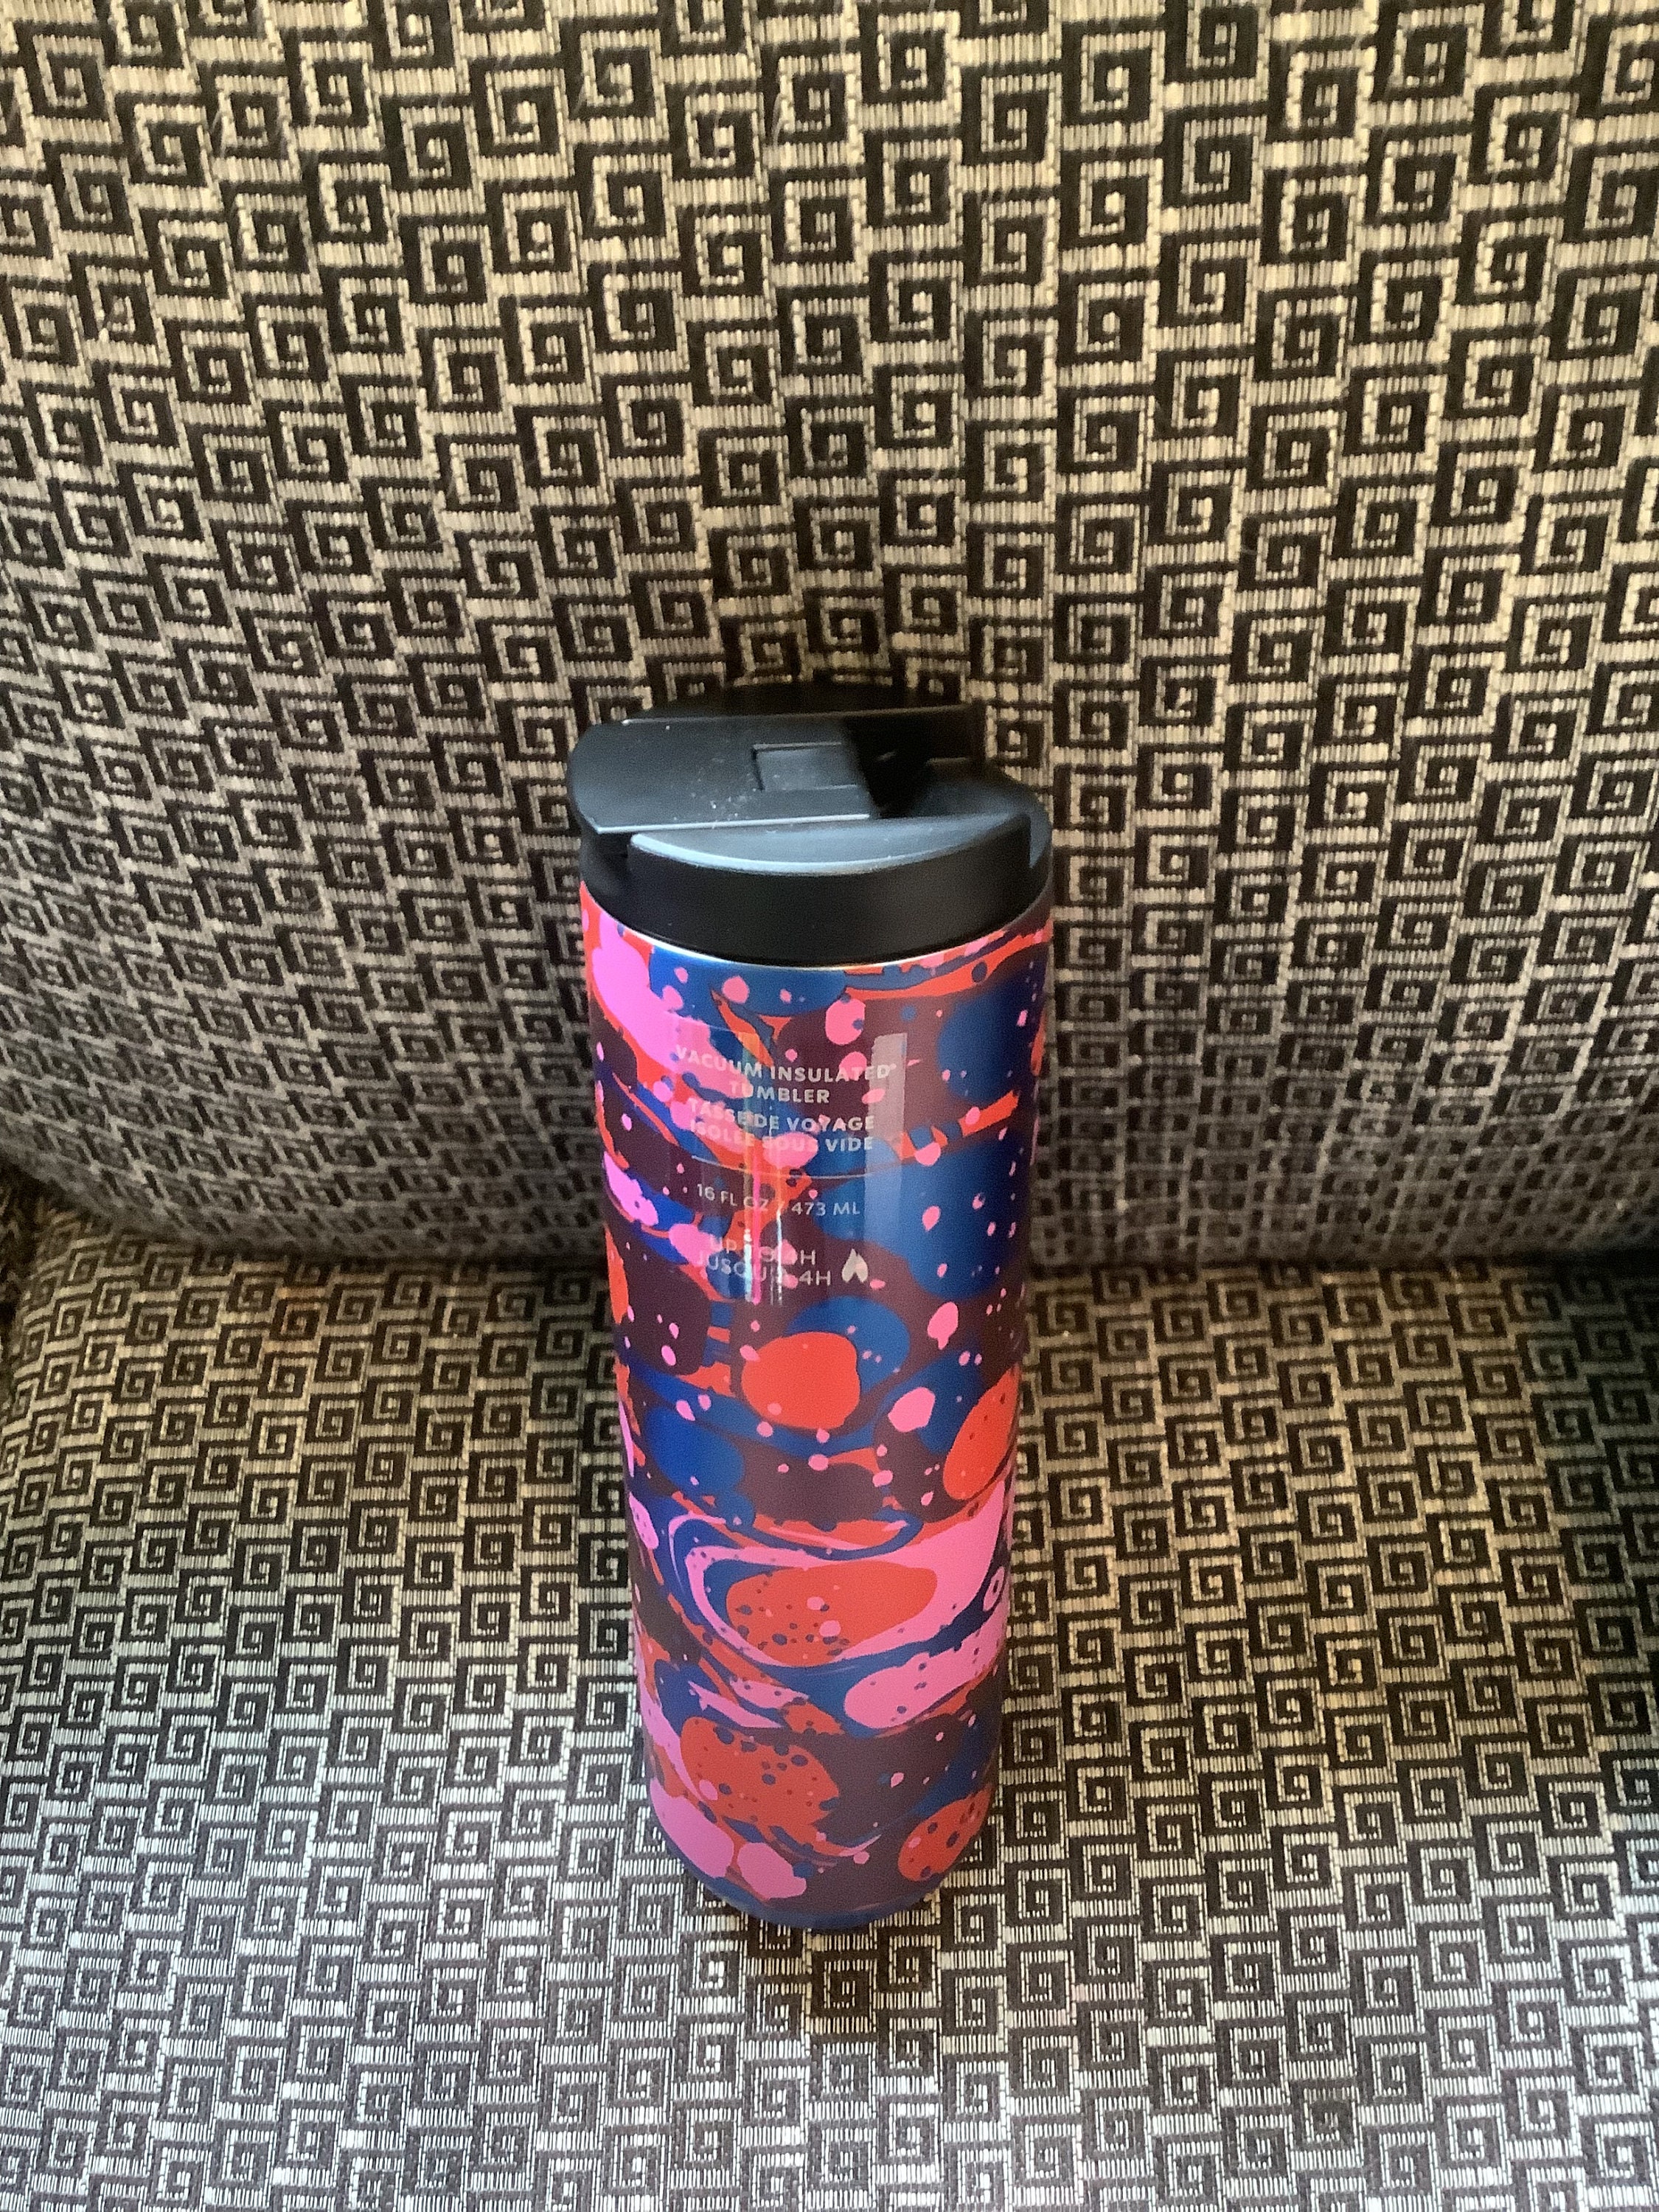 Starbucks Has New Tumblers And Mugs For Spring 2020—Matte Pink Cup, Easter  Mugs